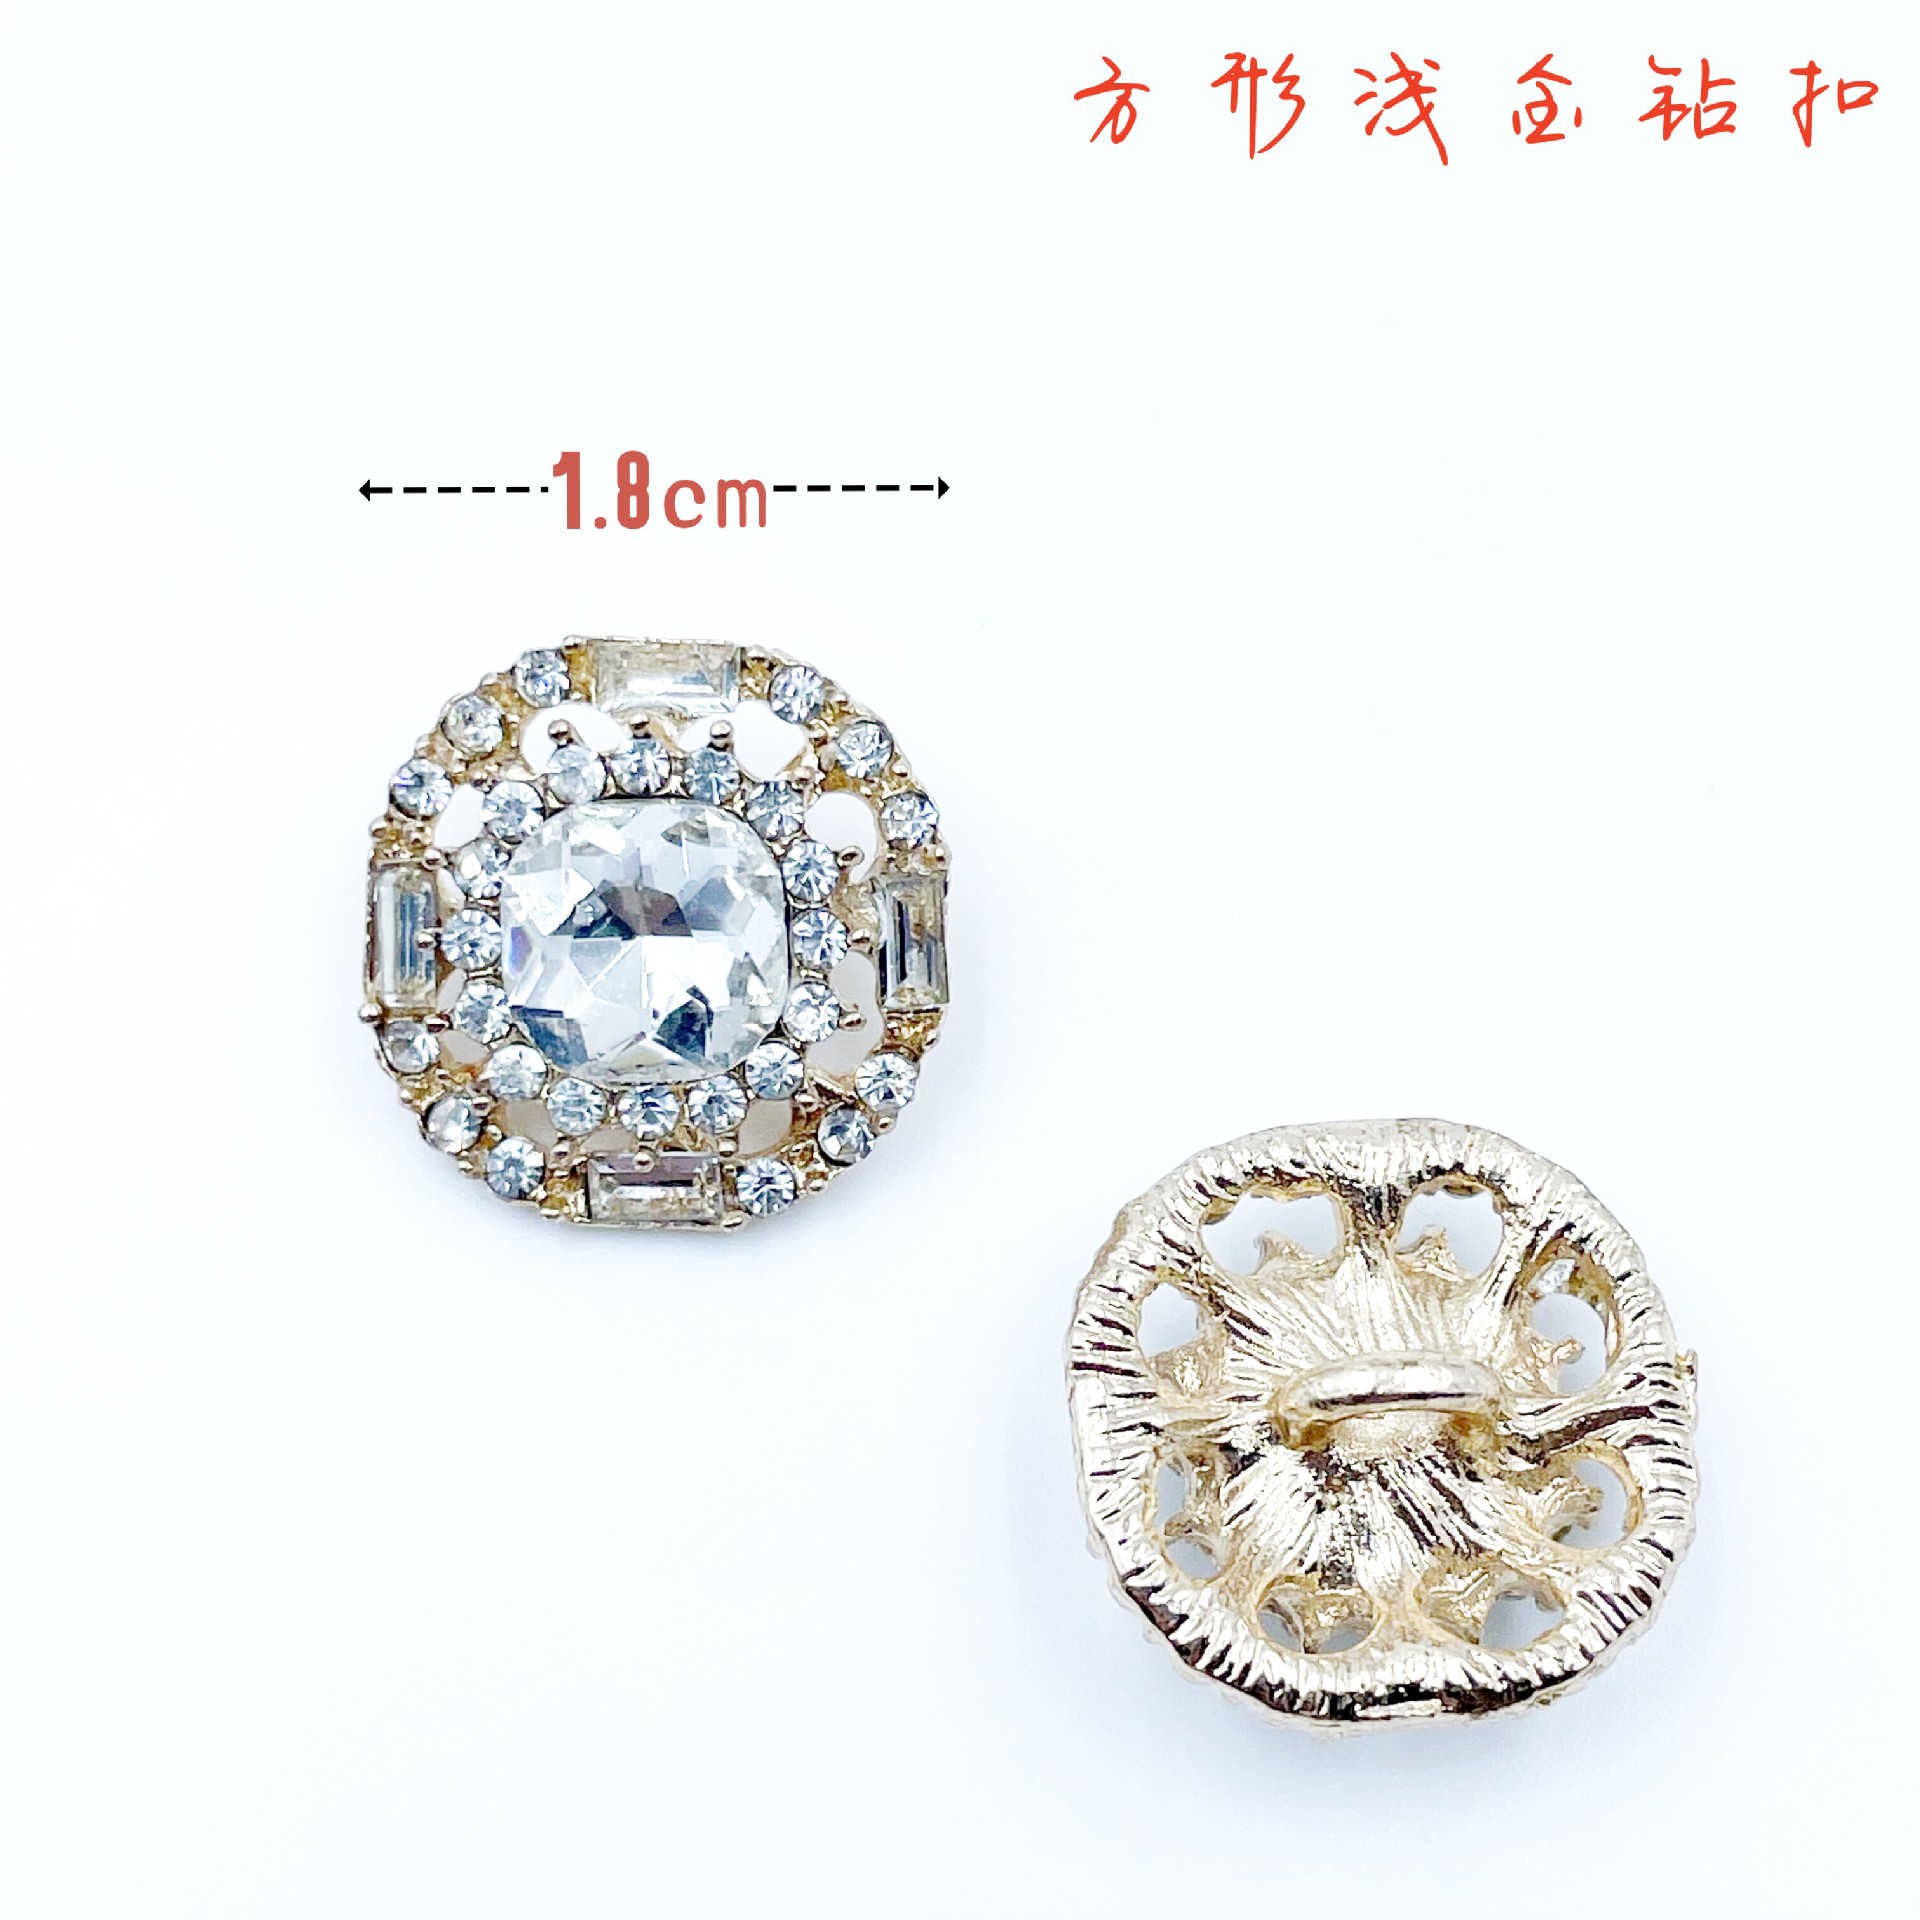 In Stock Hot Sale Welding Hand Sewing High Foot Diamond Button Rhinestone Pearl Classic Style Decorative Buckle DIY Clothing Sccessories